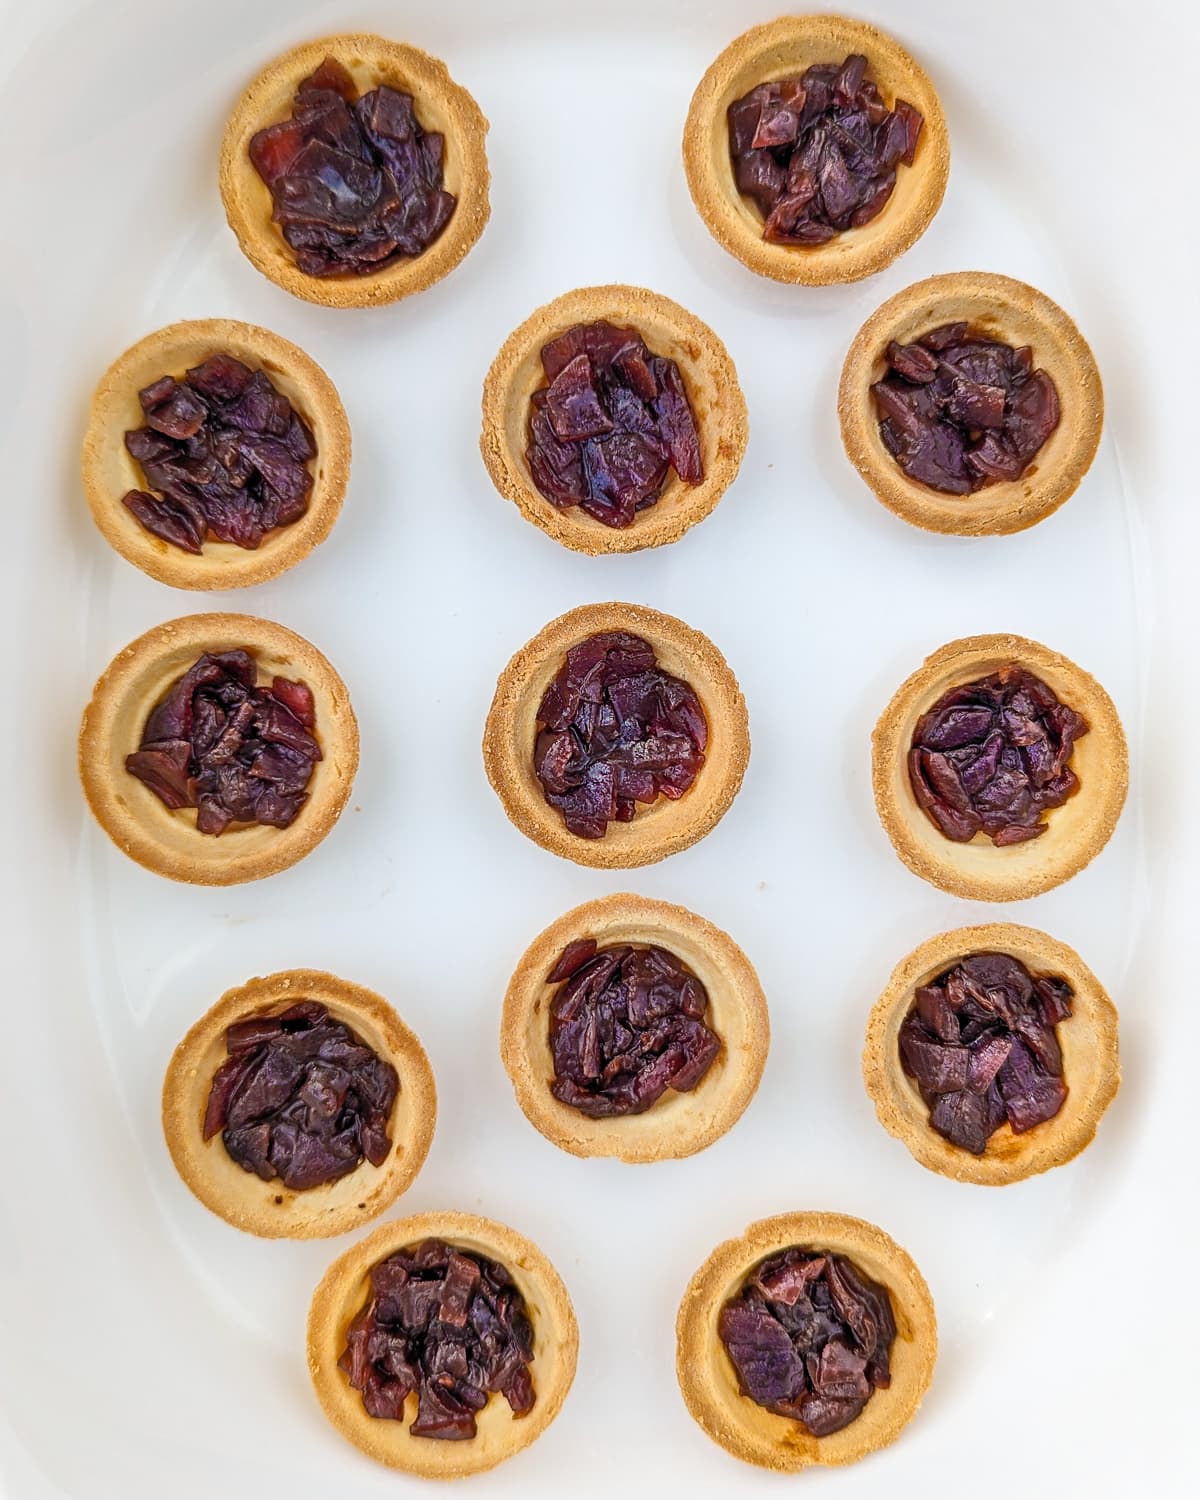 White traybake with tartlets stuffed with caramelized onions.